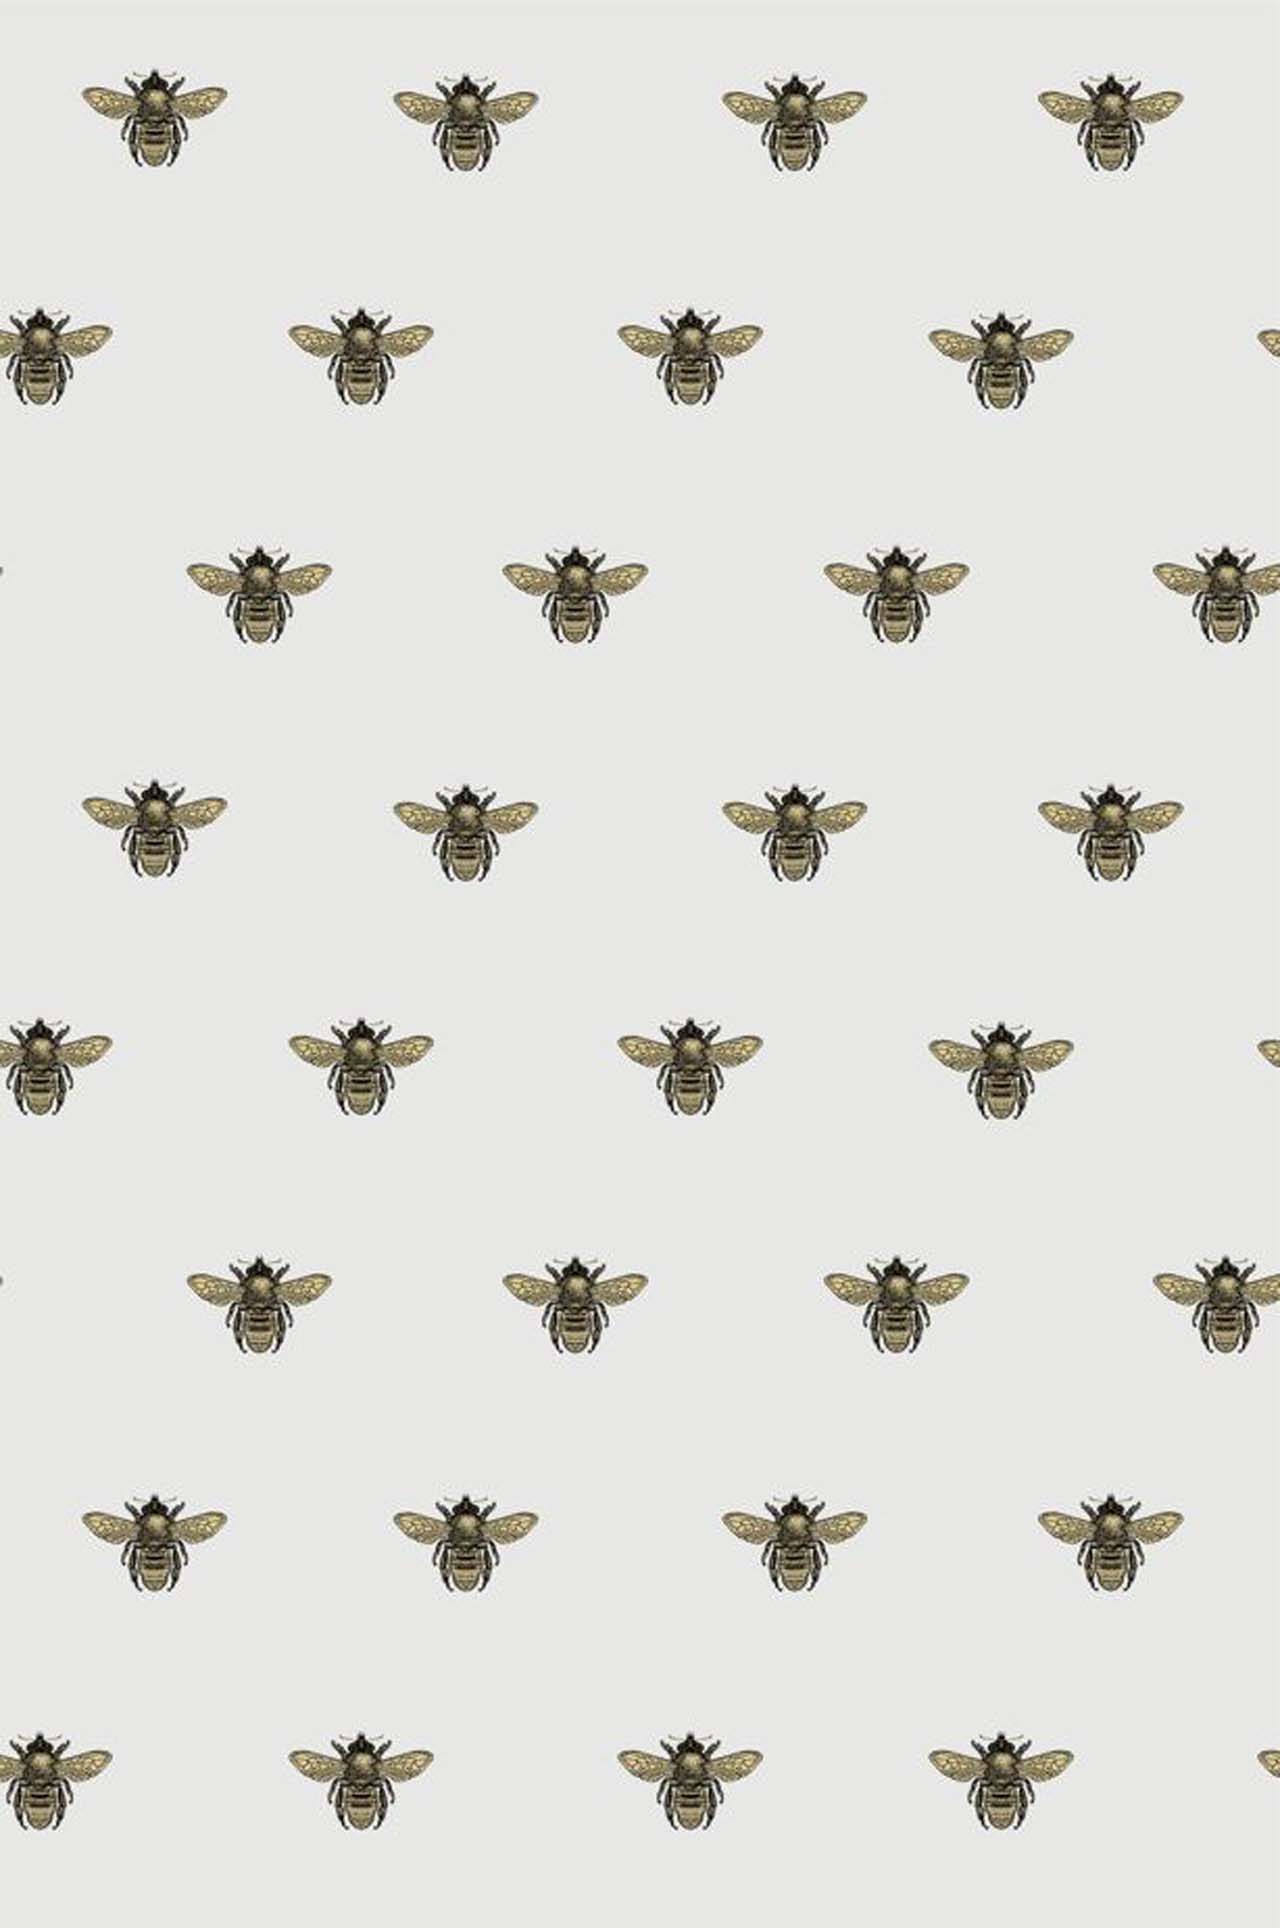 A pattern of bees on a white background - Bee, honey